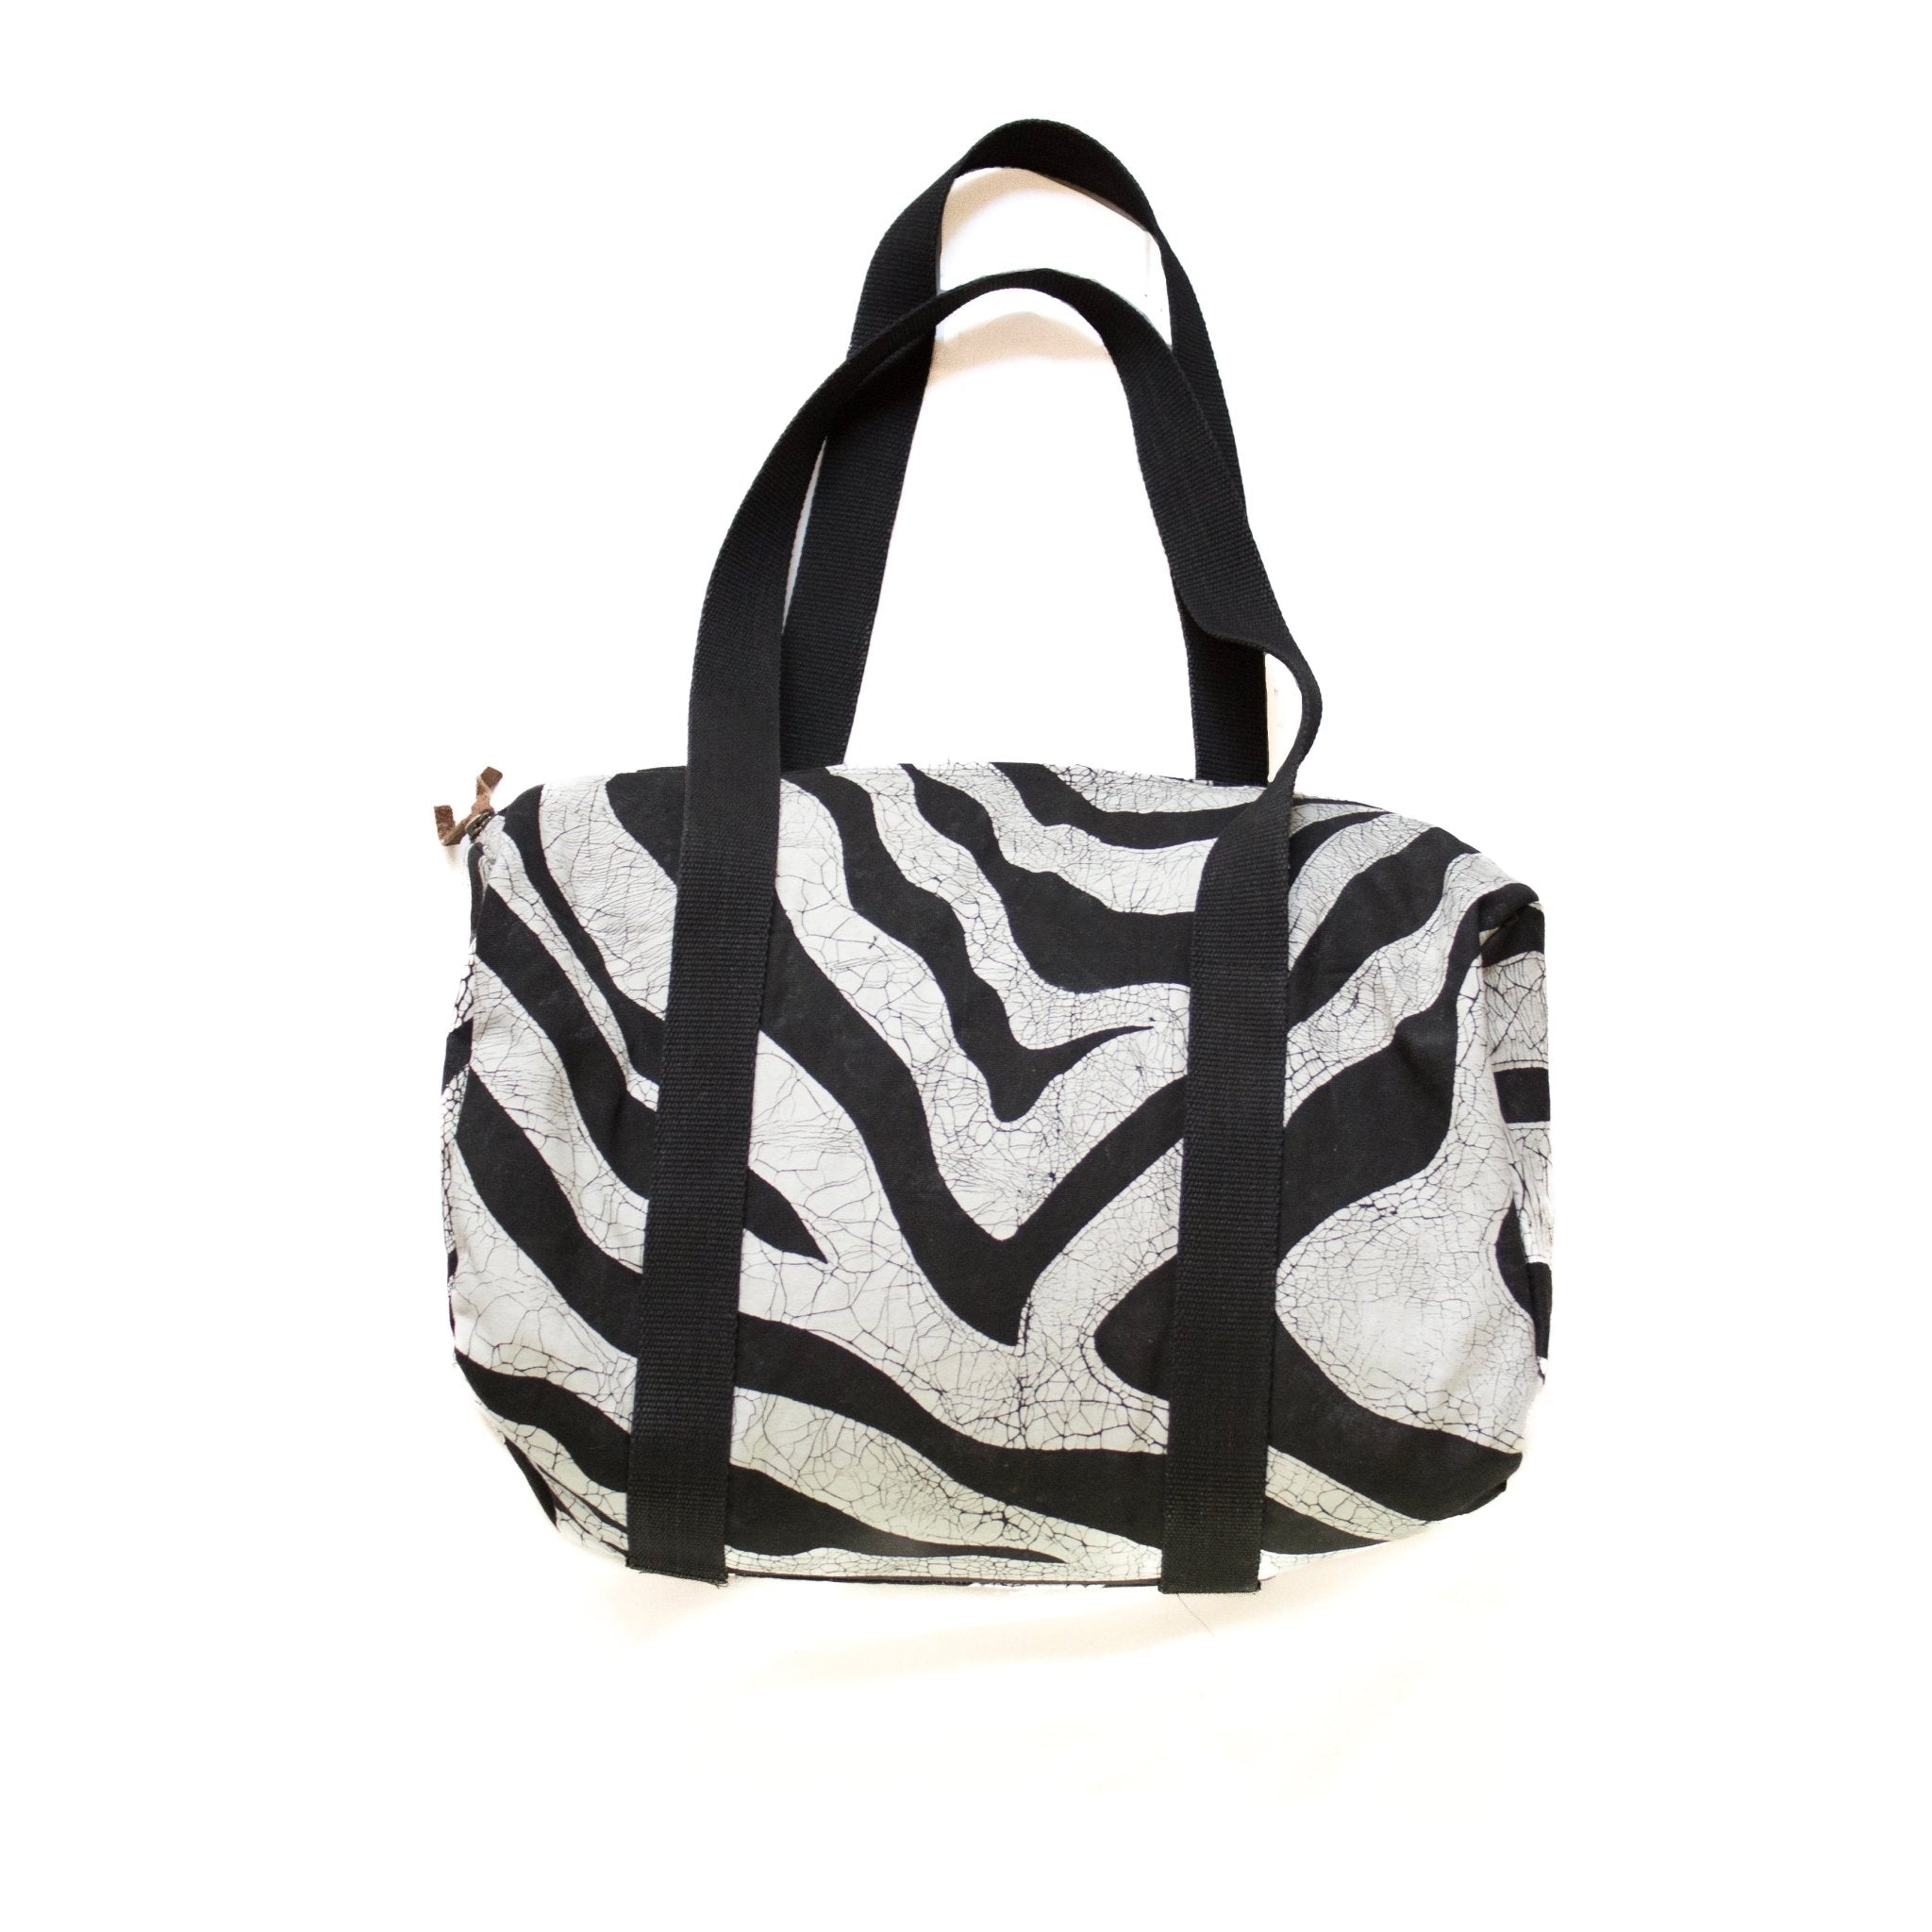 Mkupo Zebra Black Weekend Bag - Handmade by TRIBAL TEXTILES - Handcrafted Home Decor Interiors - African Made